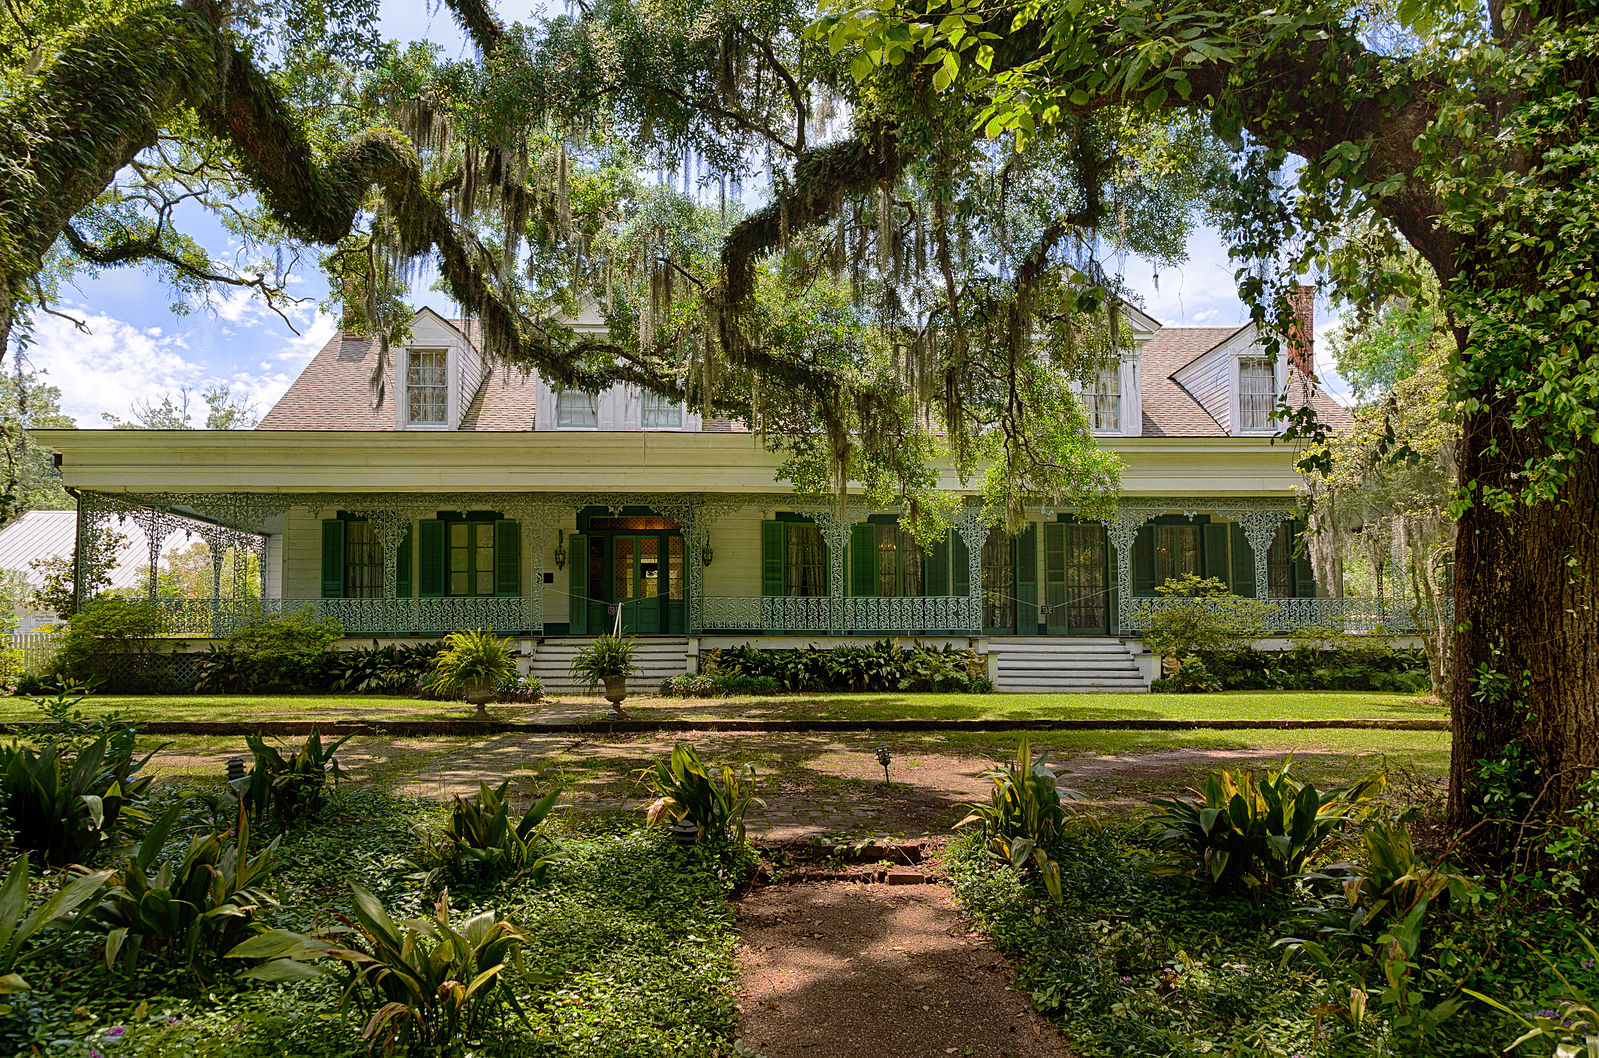 The Myrtles Plantation in St. Francisville, Louisiana